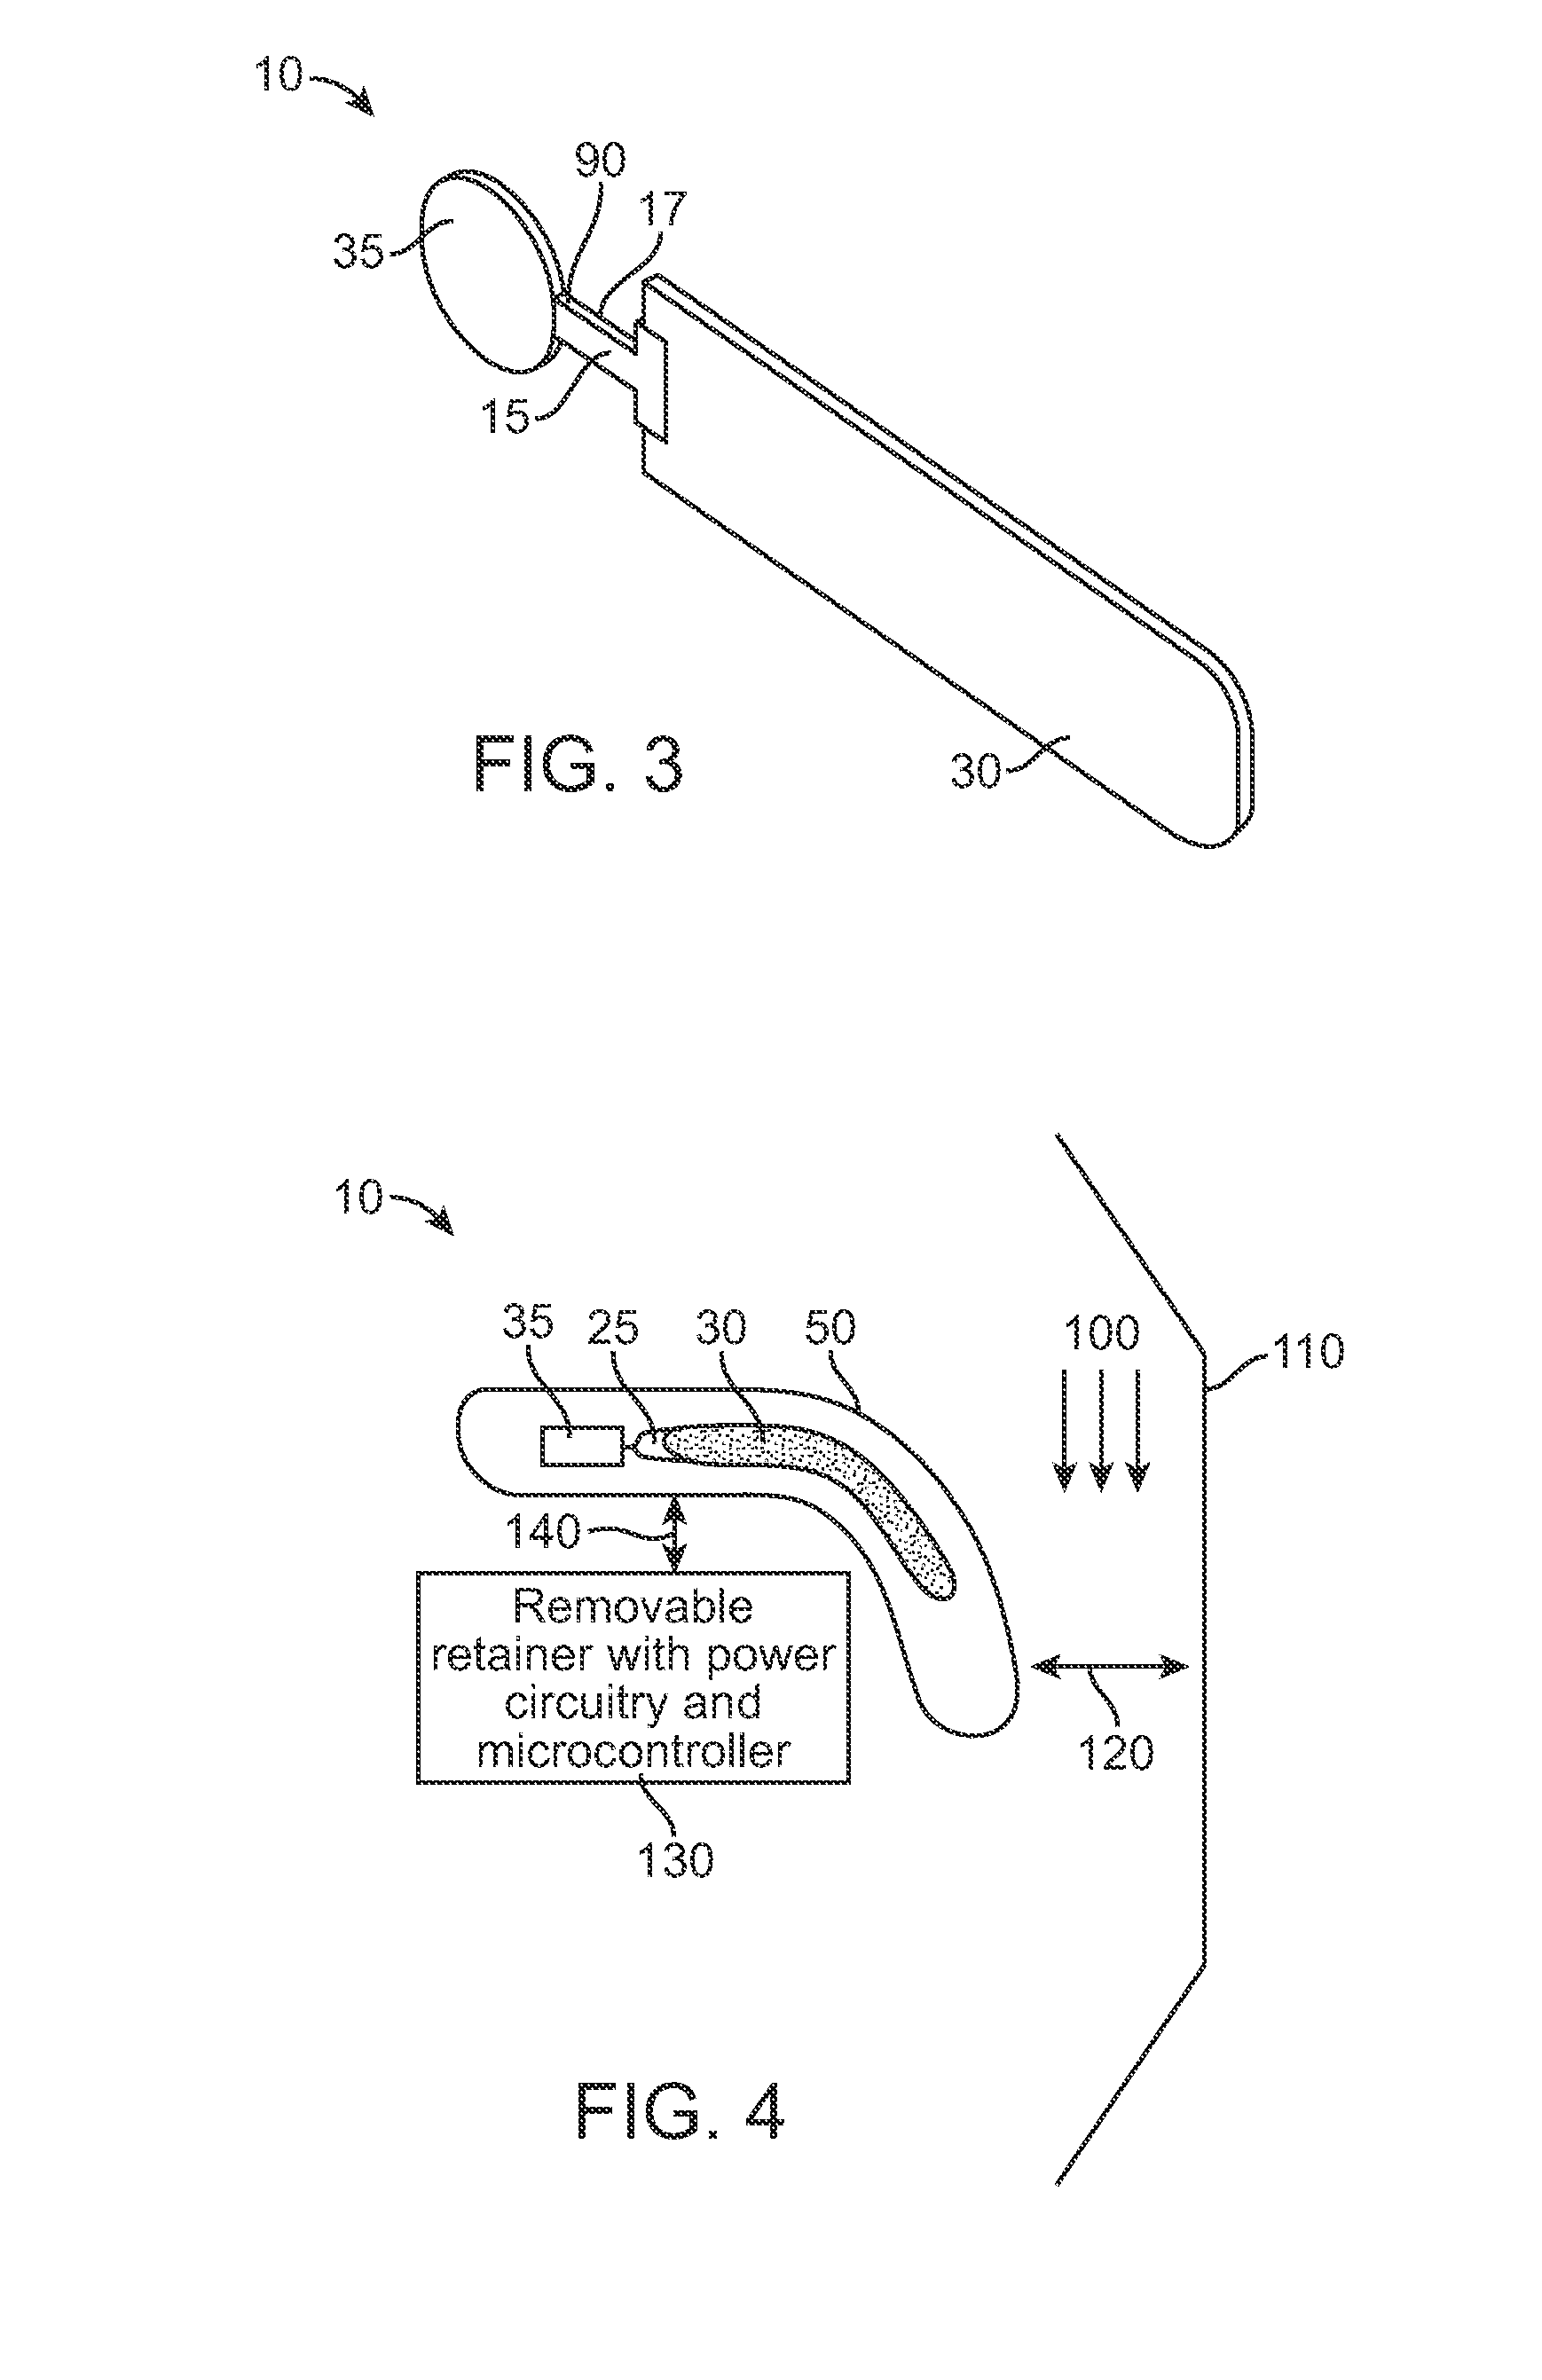 Detection of implant functionality